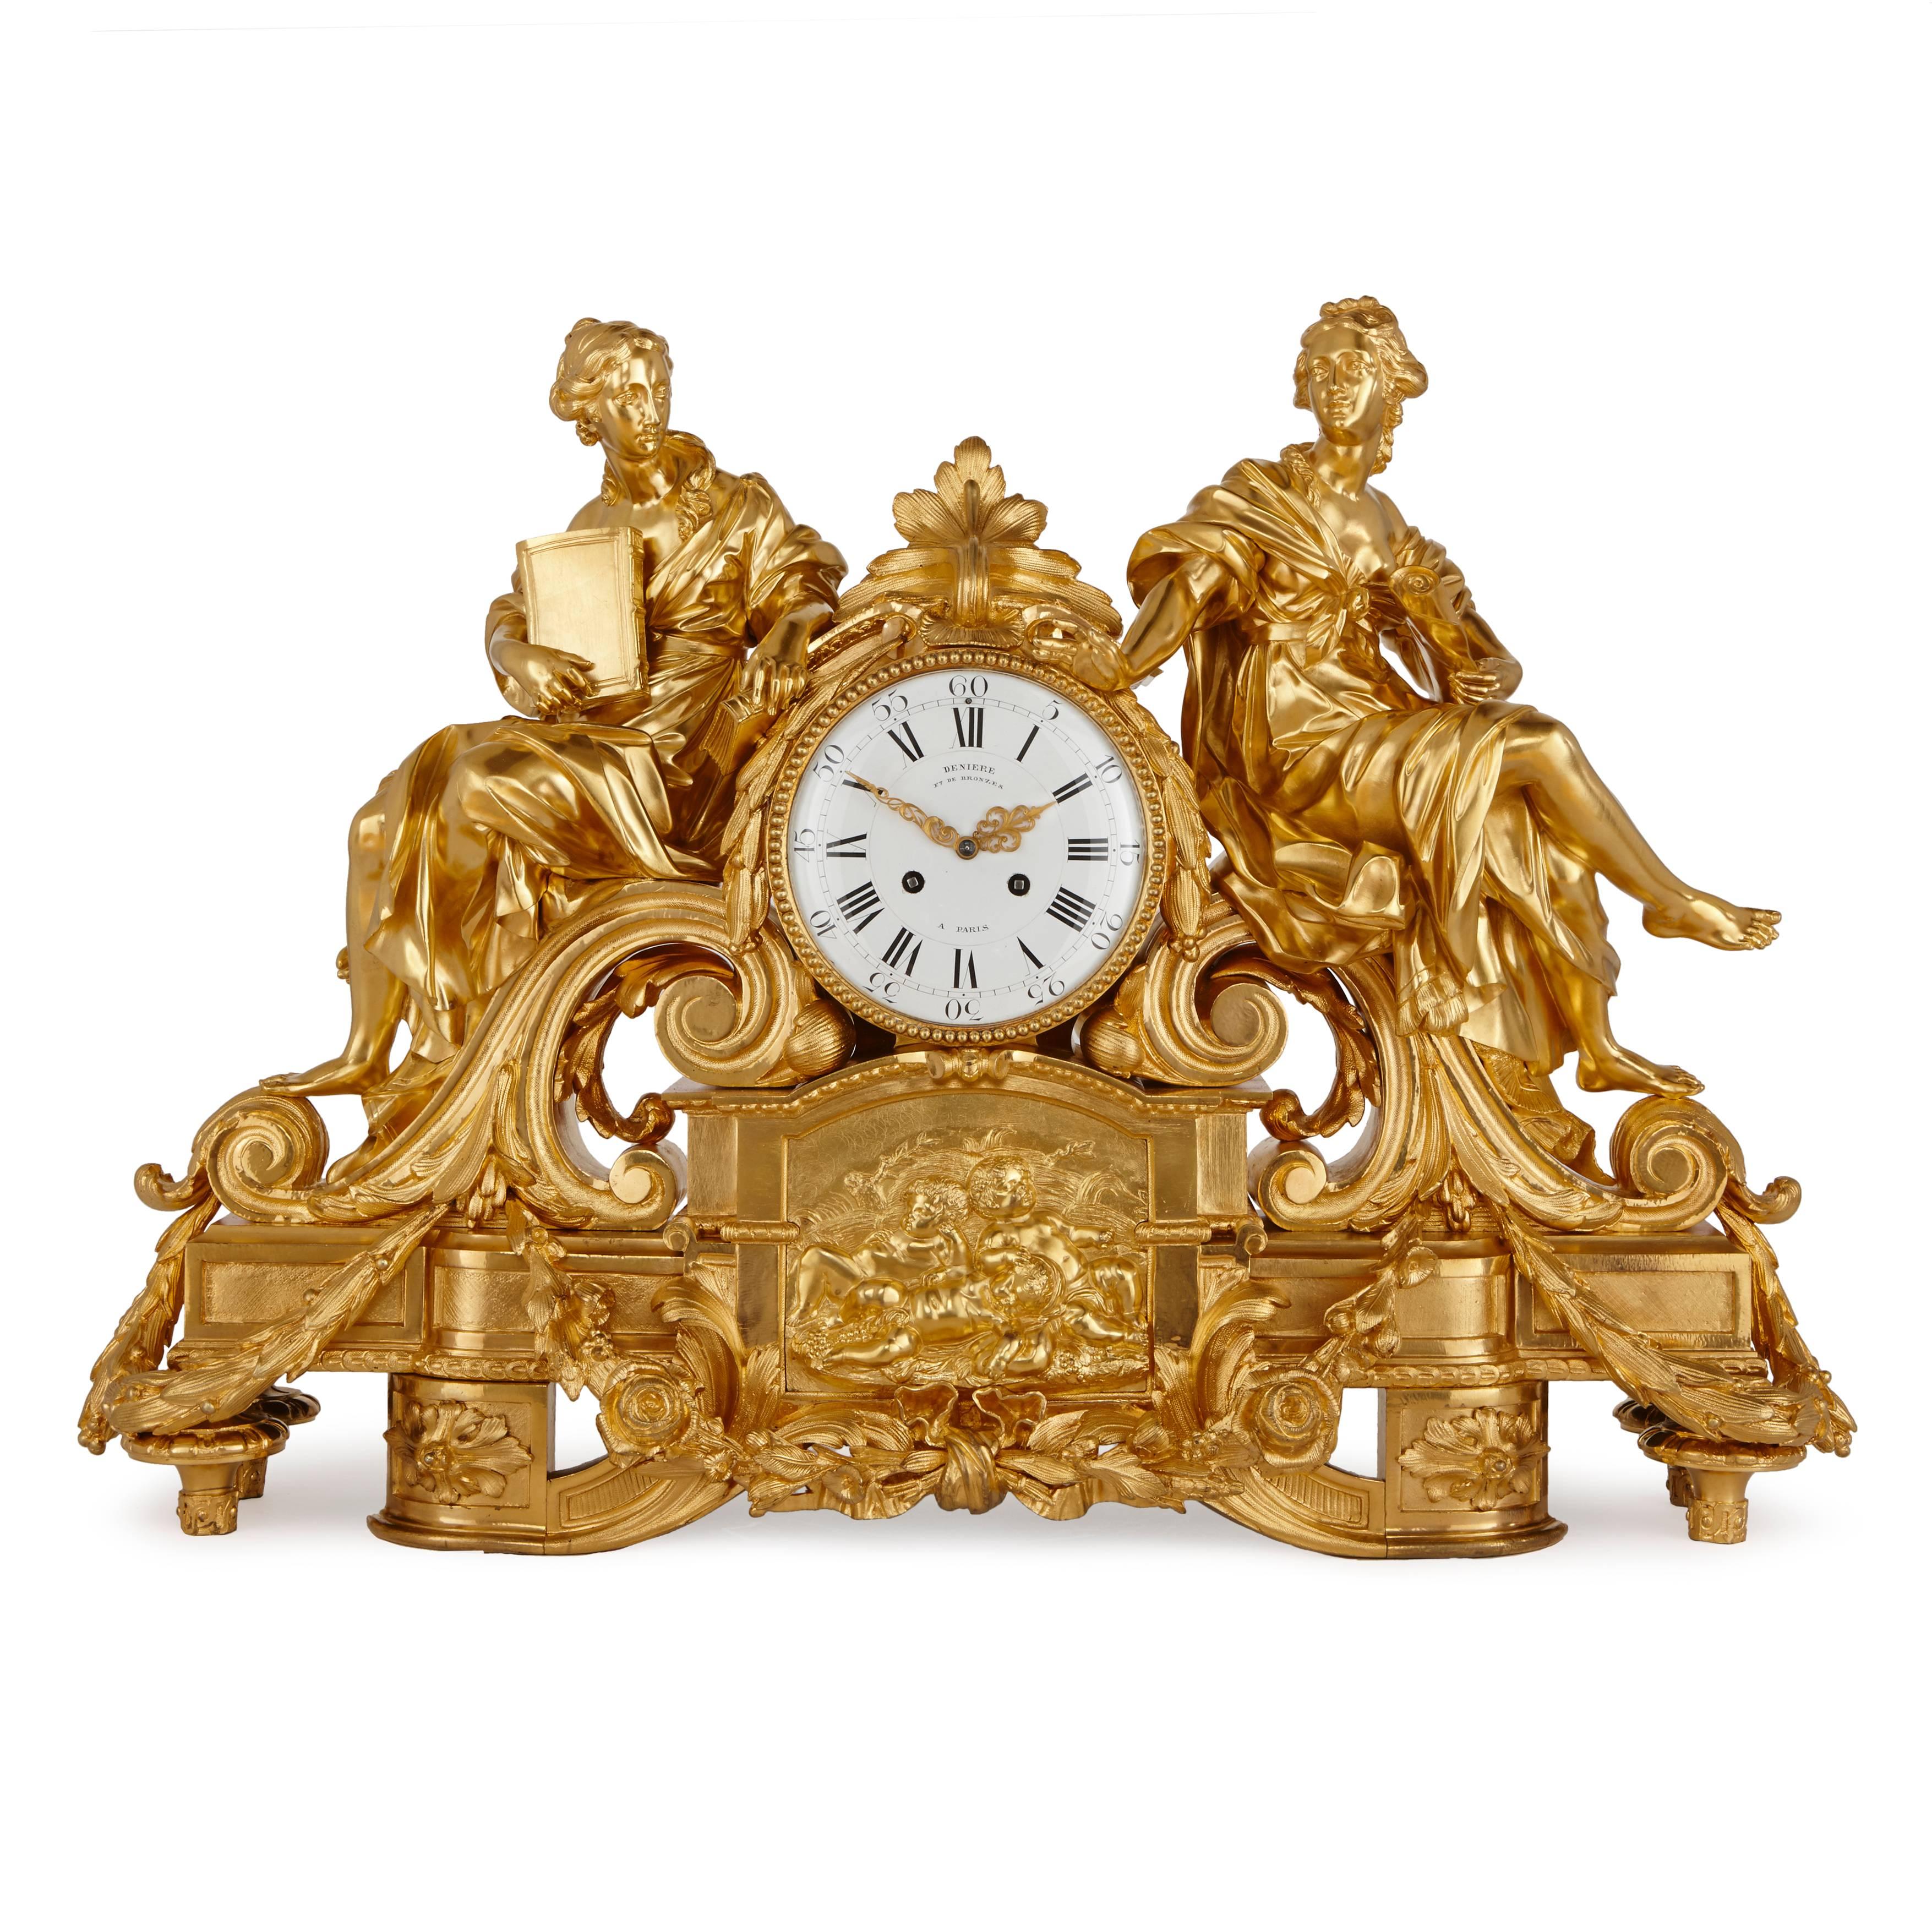 The central circular dial signed 'Denière / Ft de Bronzes / A Paris', within a Fine surrounding ormolu case depicting two seated full length figures of a male and female, the male representing Architecture and the female representing Literature,